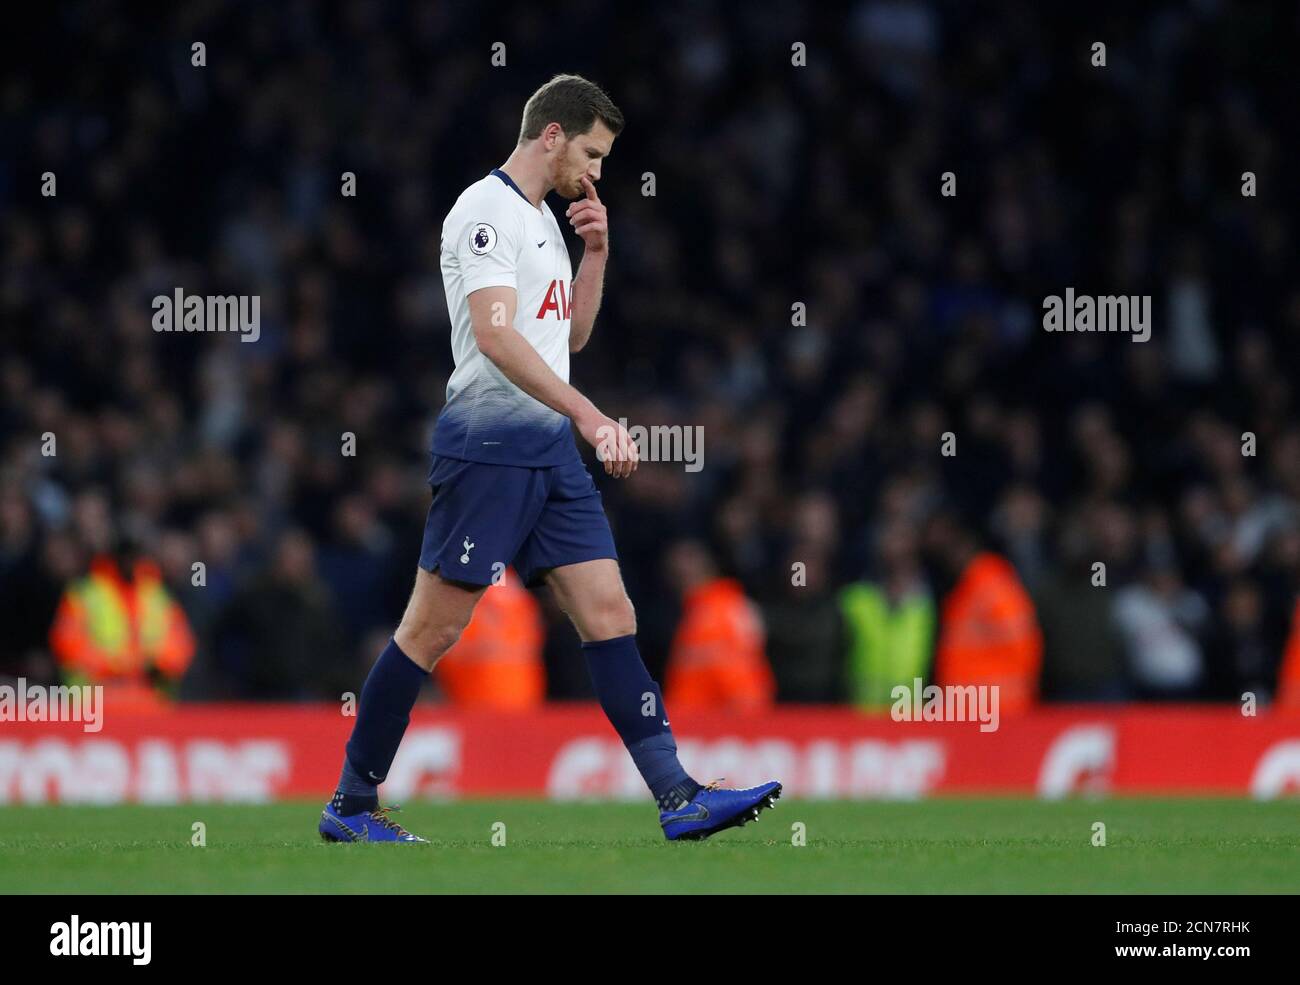 Tottenham v arsenal red hi-res photography and Alamy